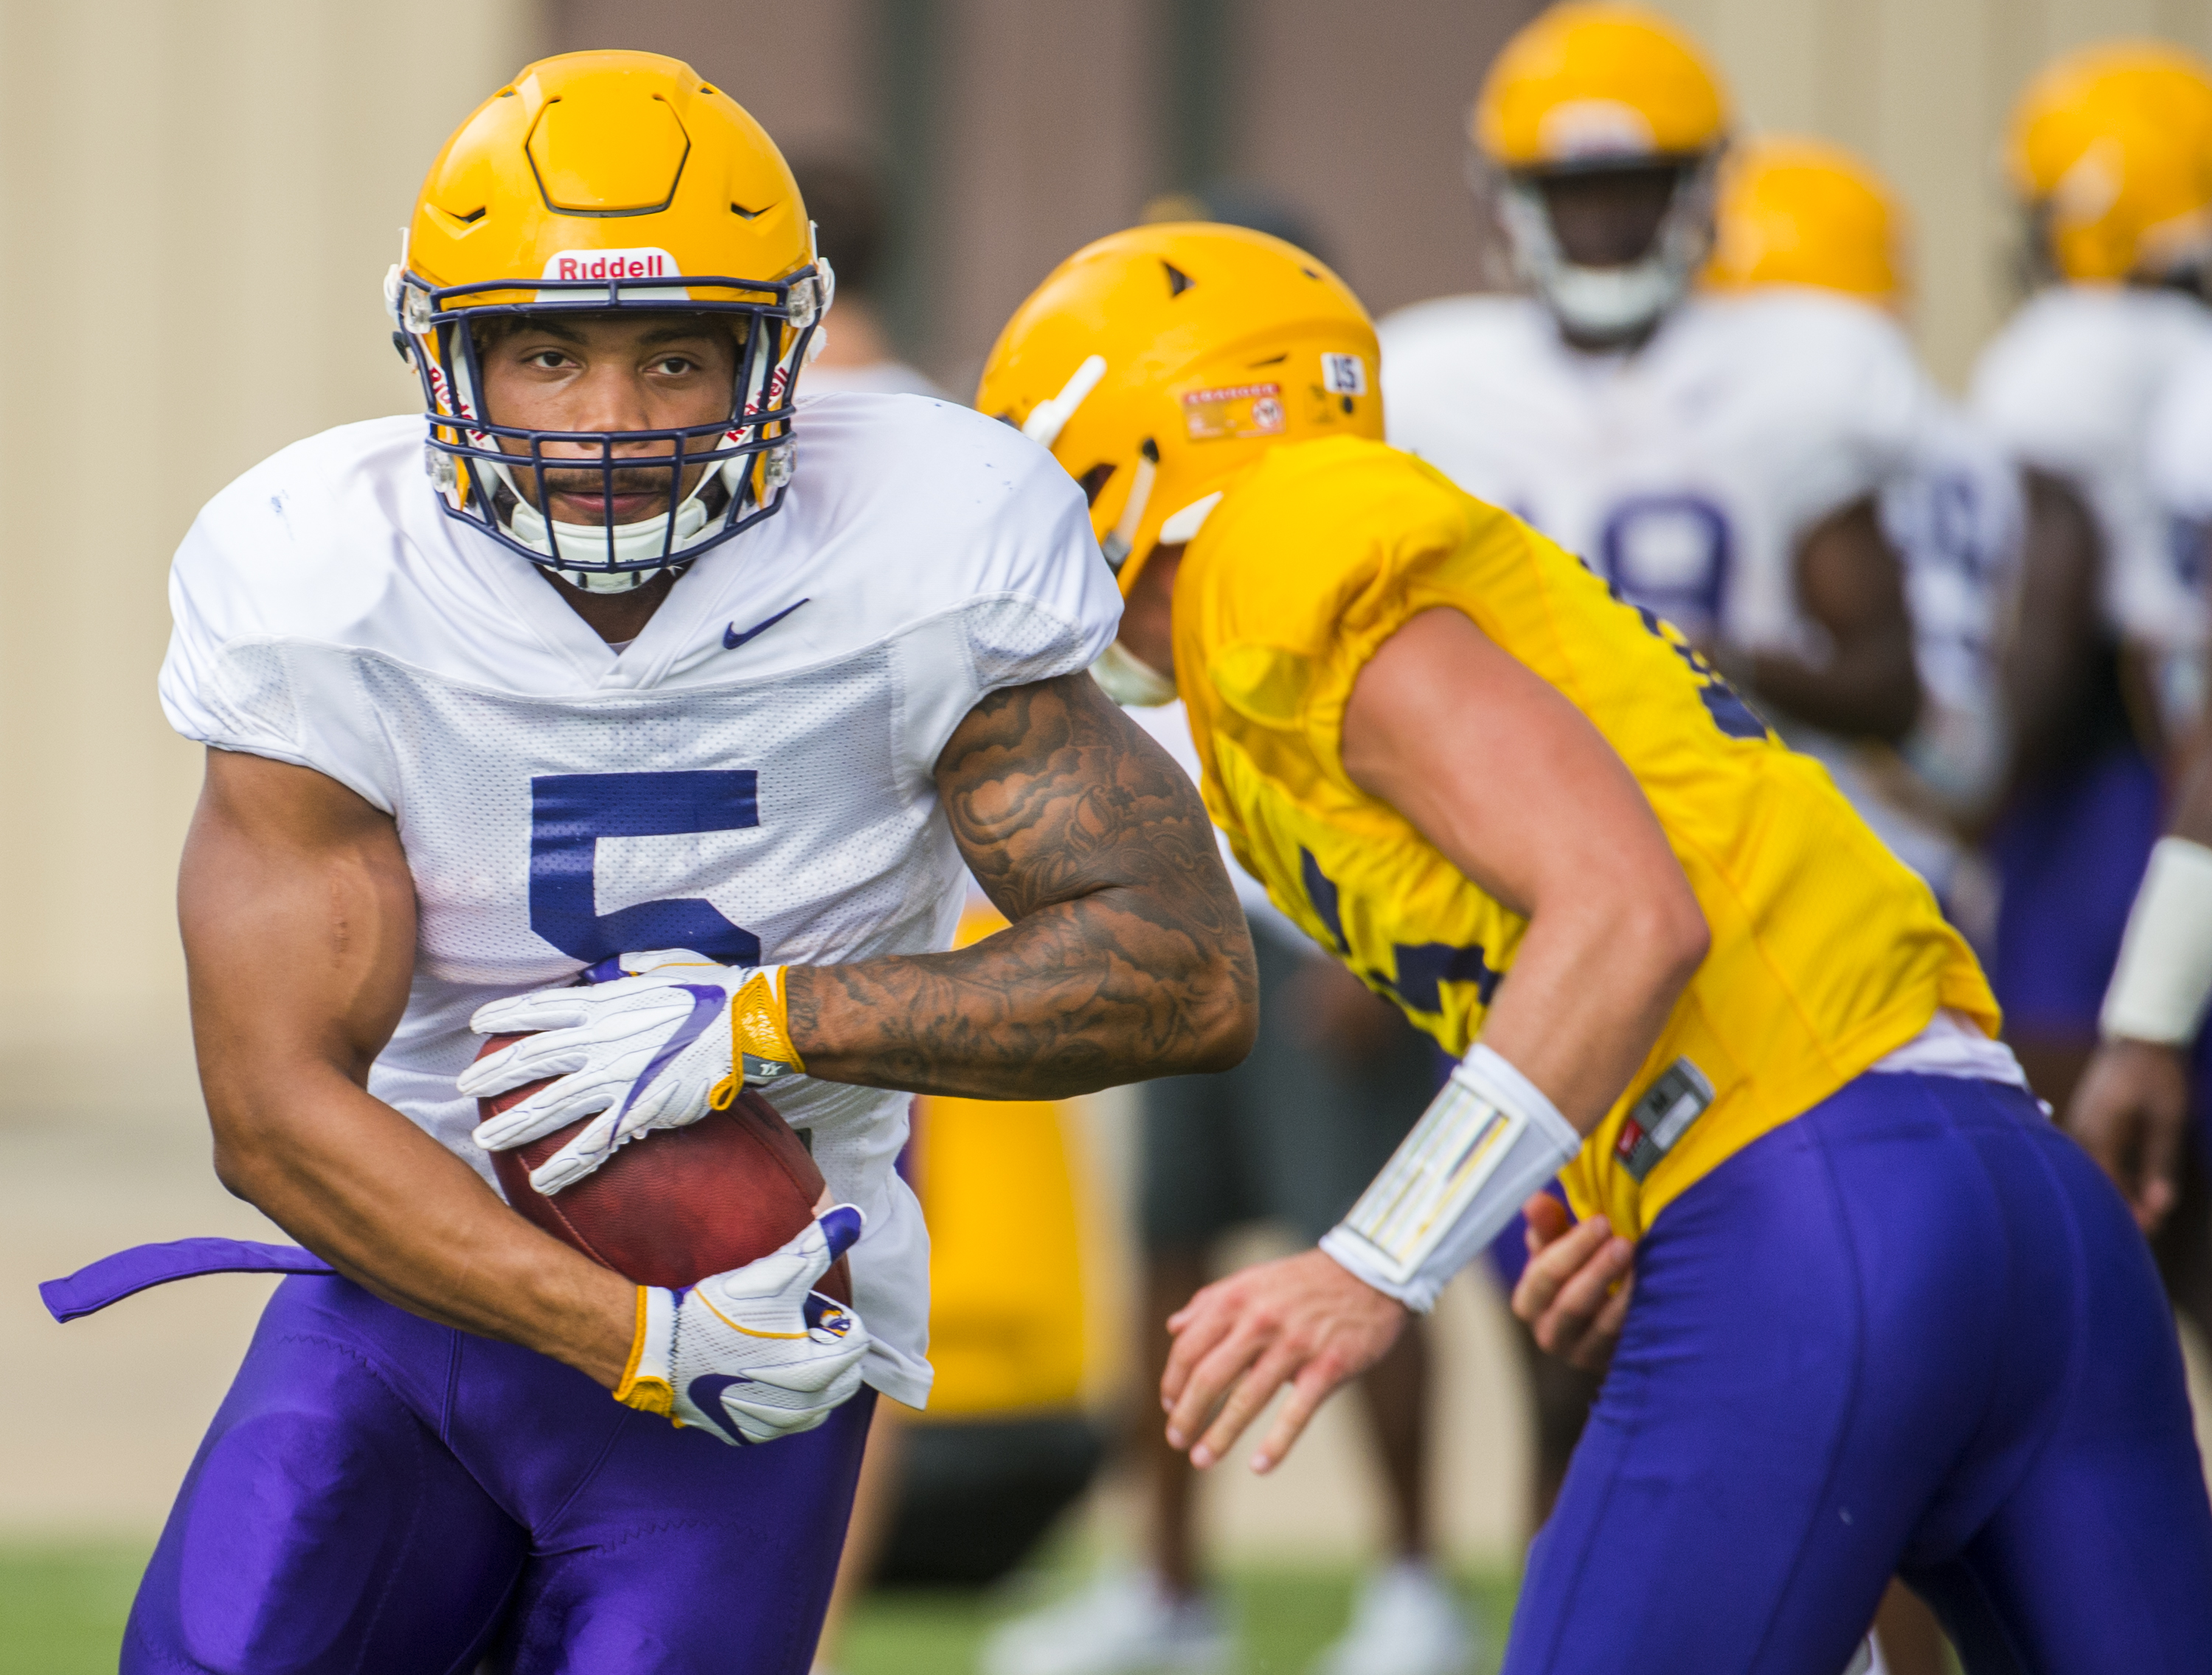 OFFENSE SHINES IN LSU’S SECOND PRESEASON GAME OF TRAINING CAMP